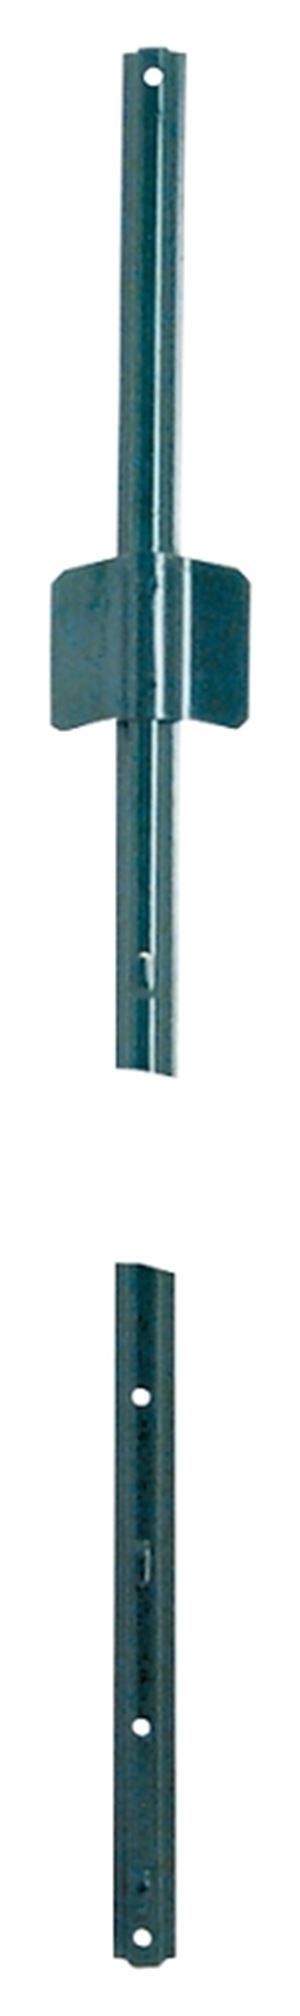 Jackson Wire 14026145 U-Post, 6 ft H, Steel, Green, Plain, Pack of 10